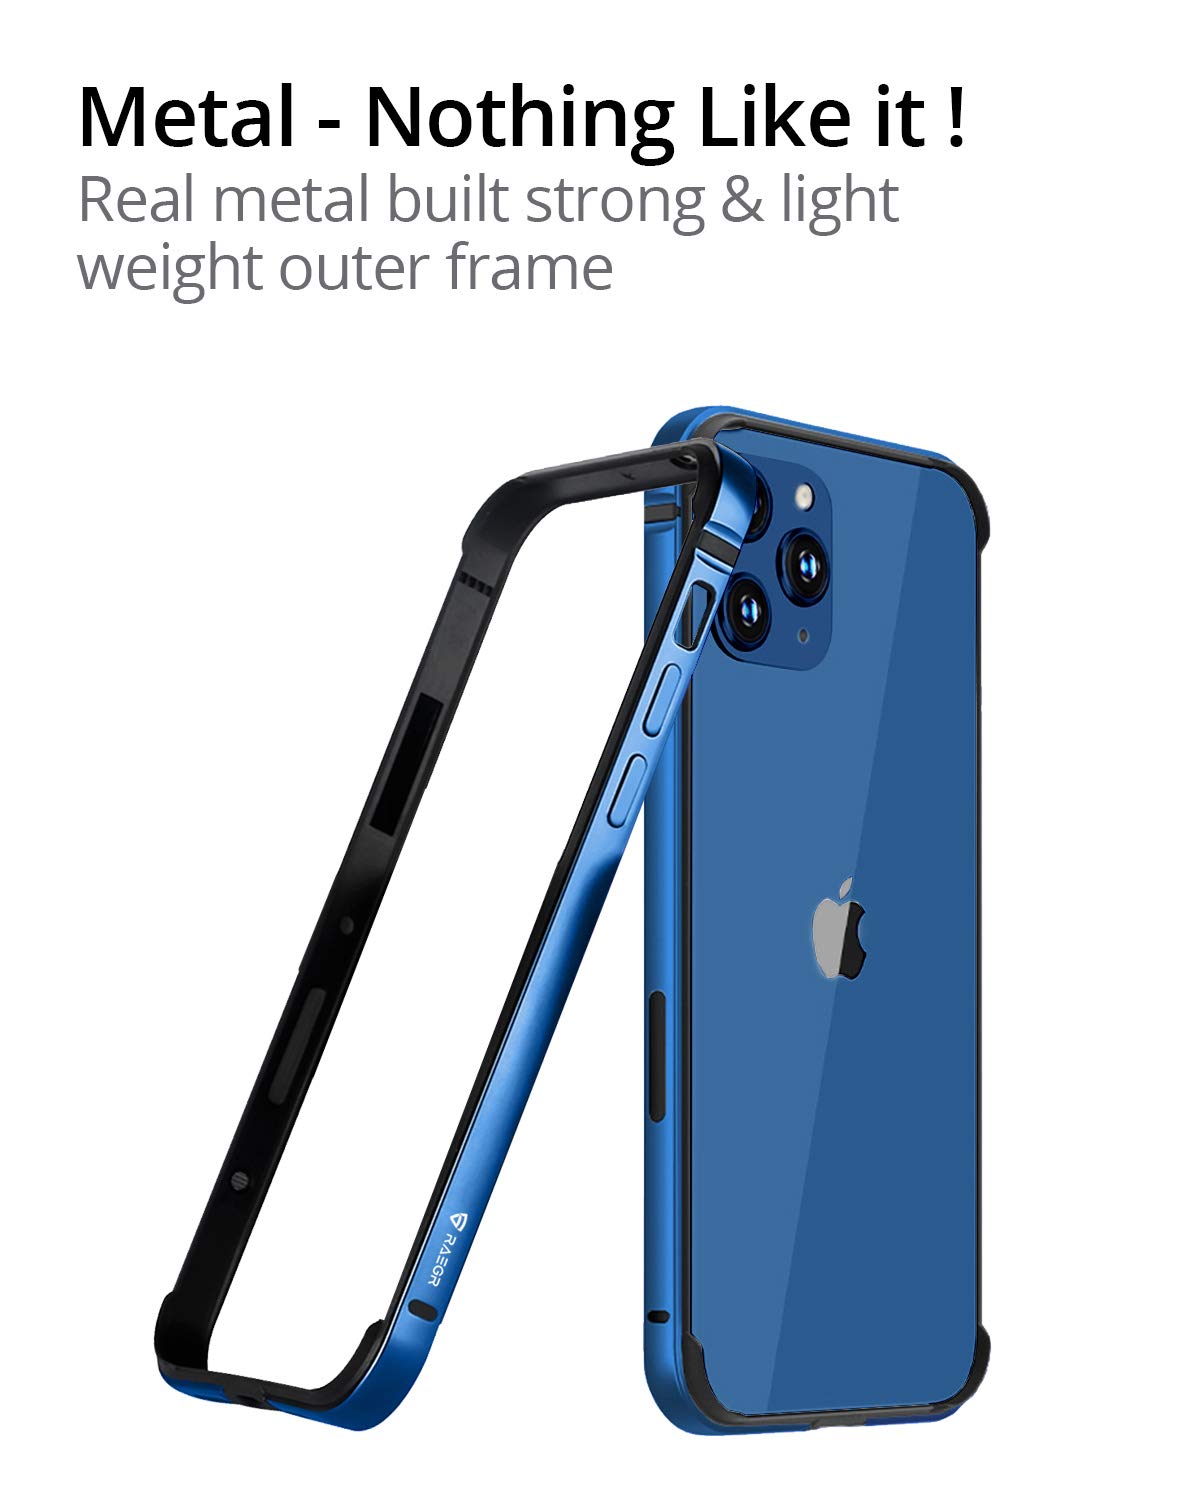 RAEGR iPhone 12 / iPhone 12 Pro 5G Anodized Aluminum Bumper Case, Supports Mag-Safe Wireless Charging 6.1